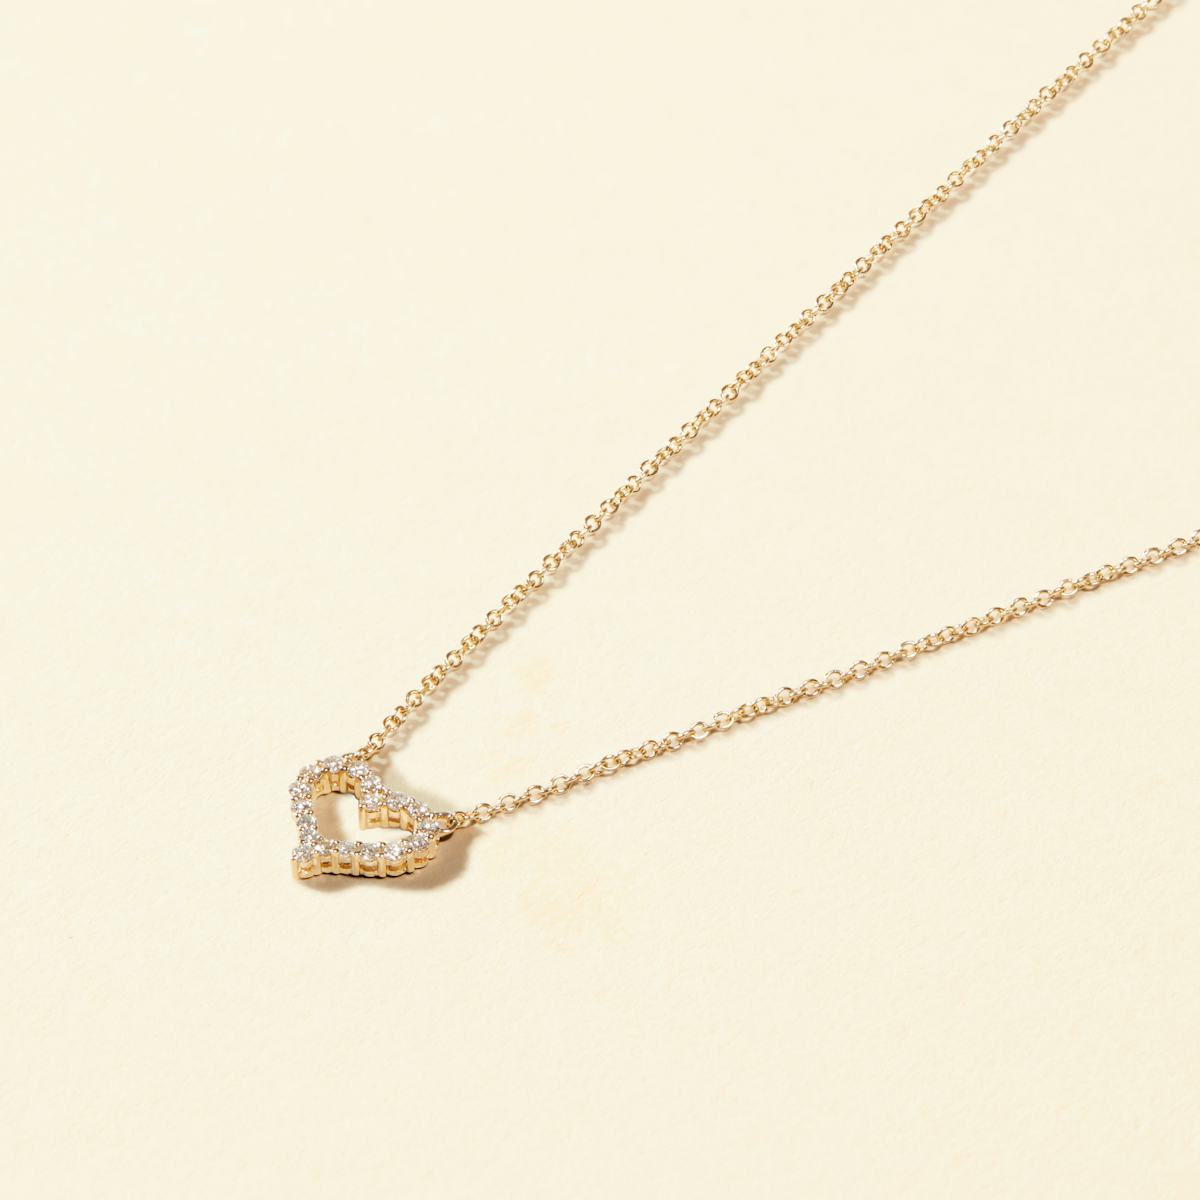 14k Solid Gold Swoon Natural Diamond Heart Necklace